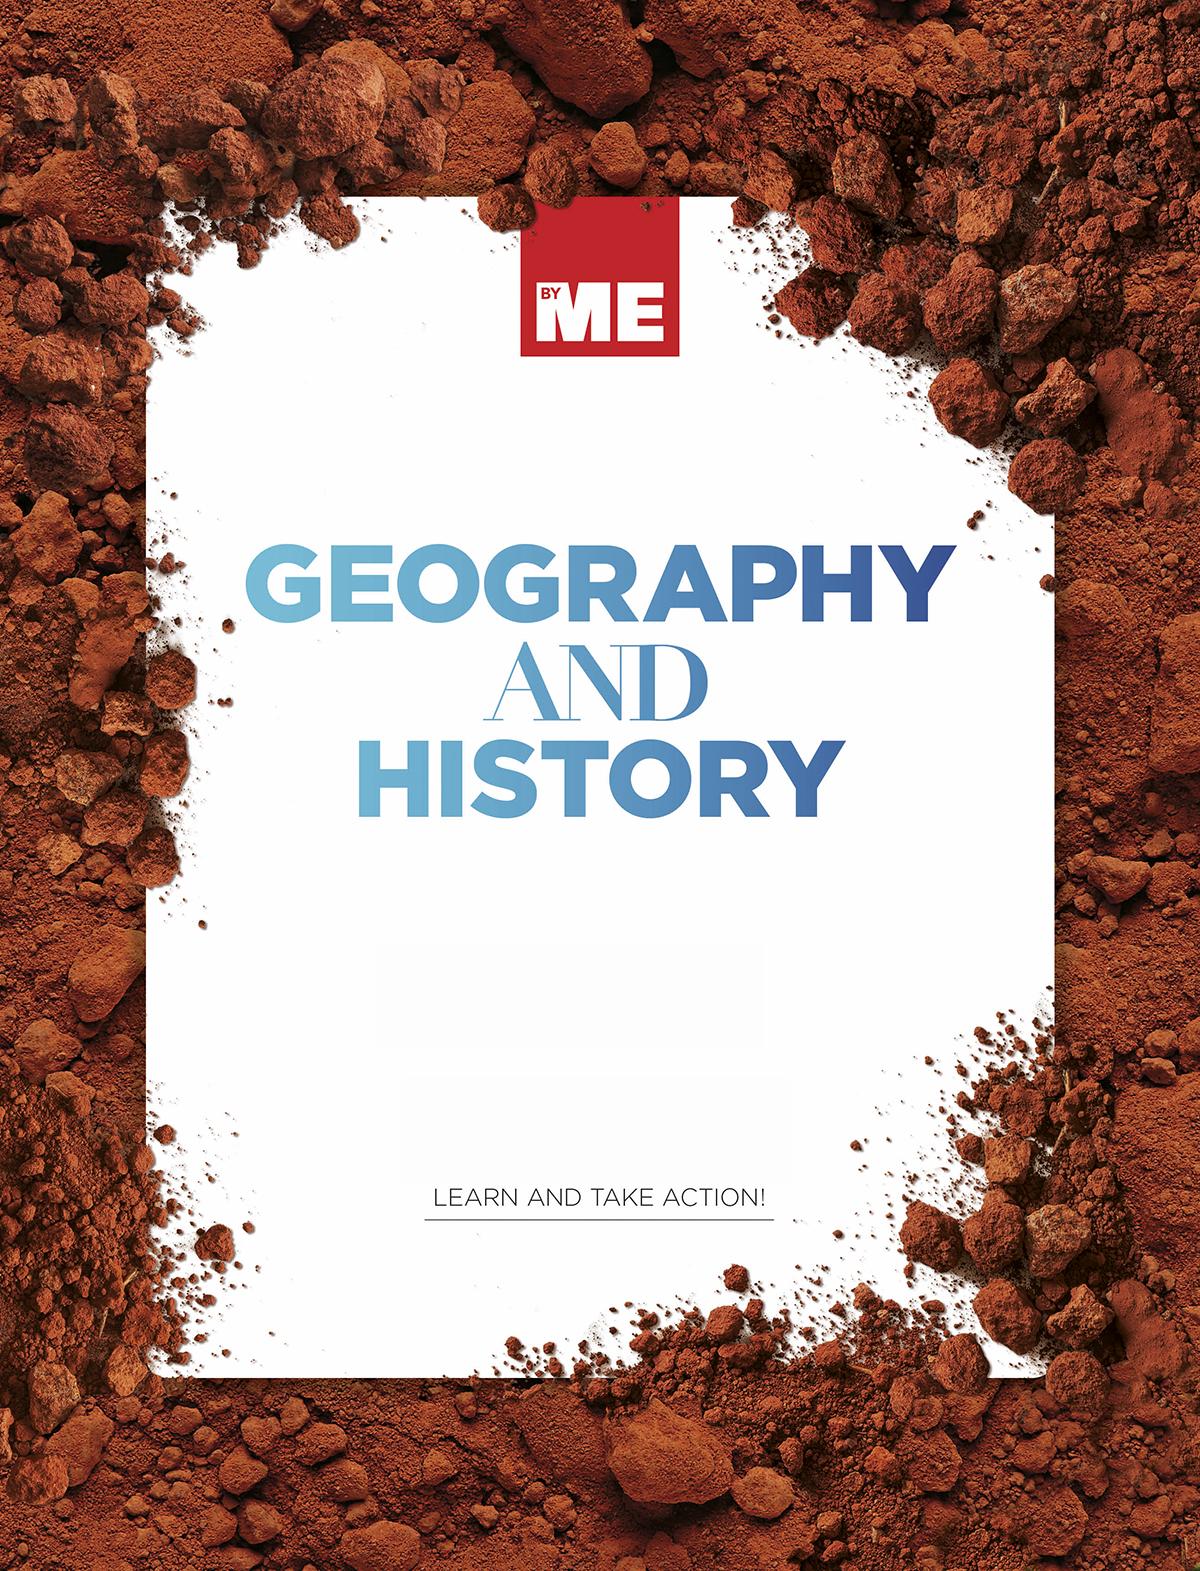 byme. Geography and history